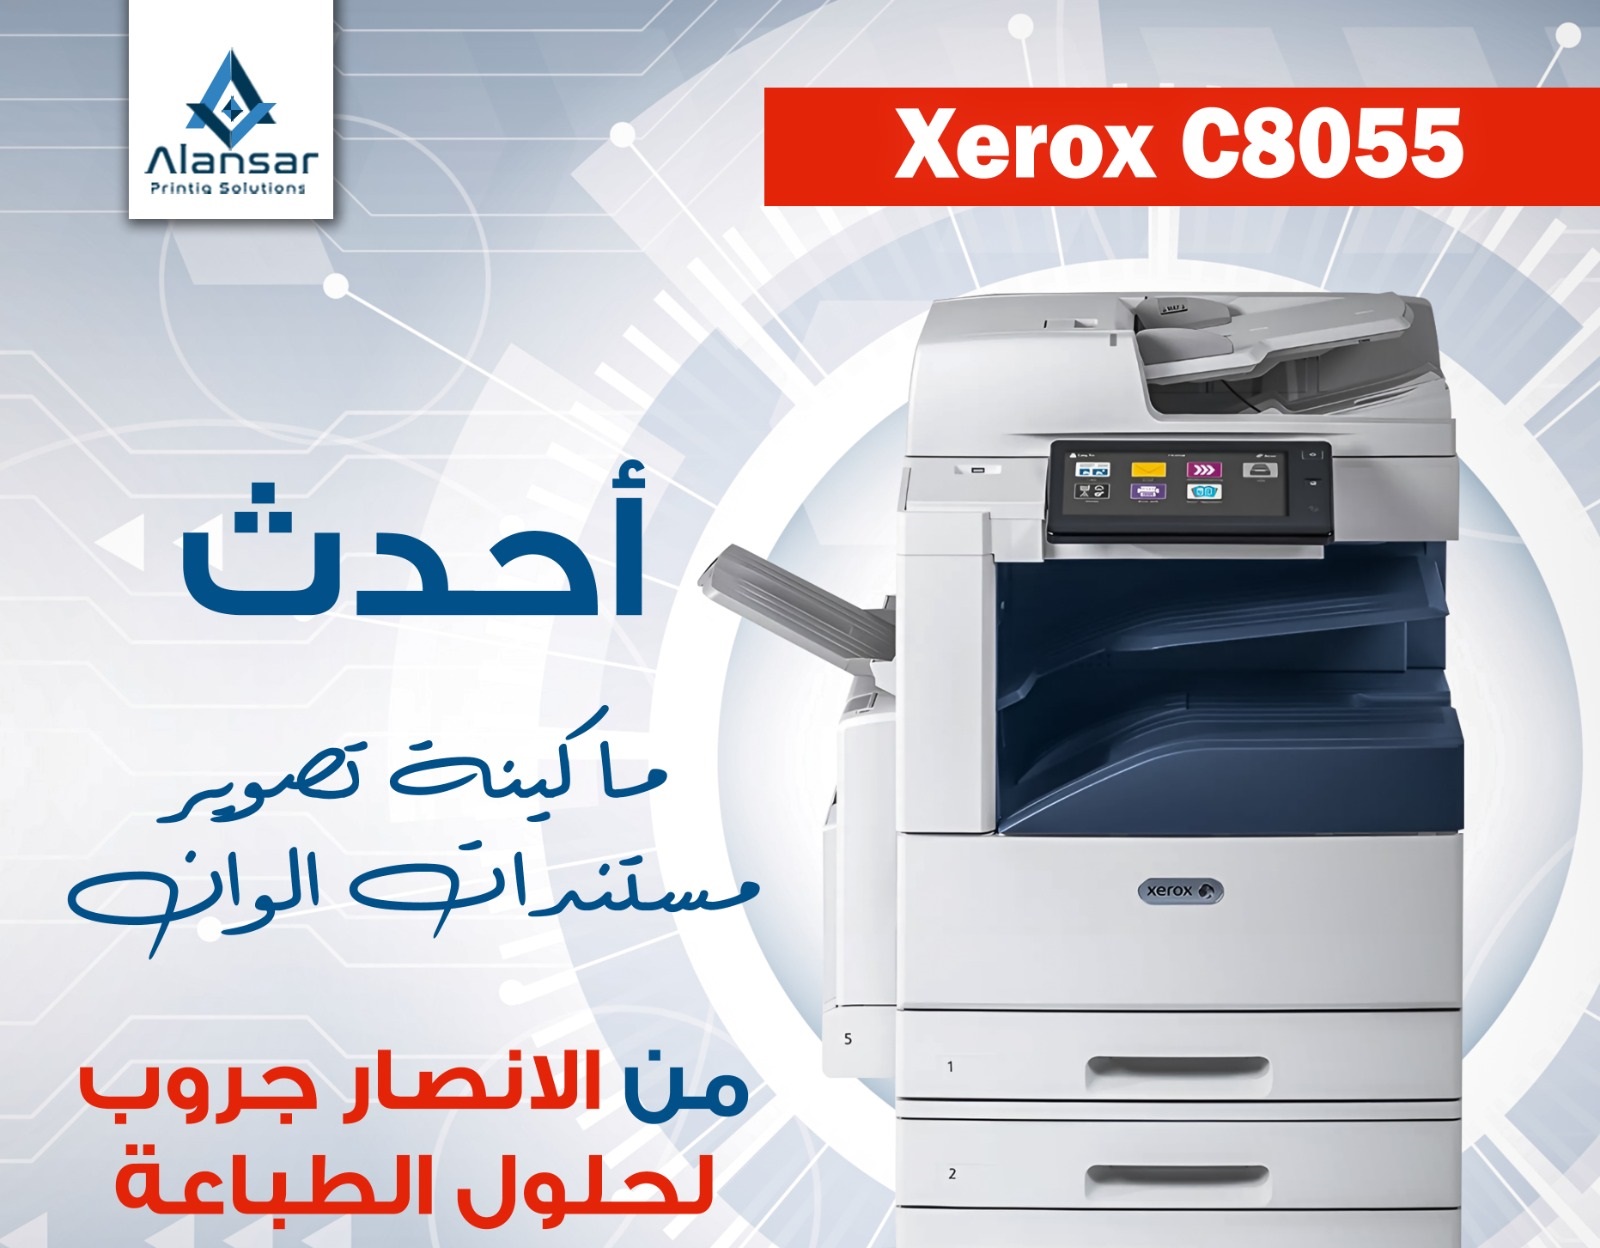 A printer with excellent specifications and an unbeatable price